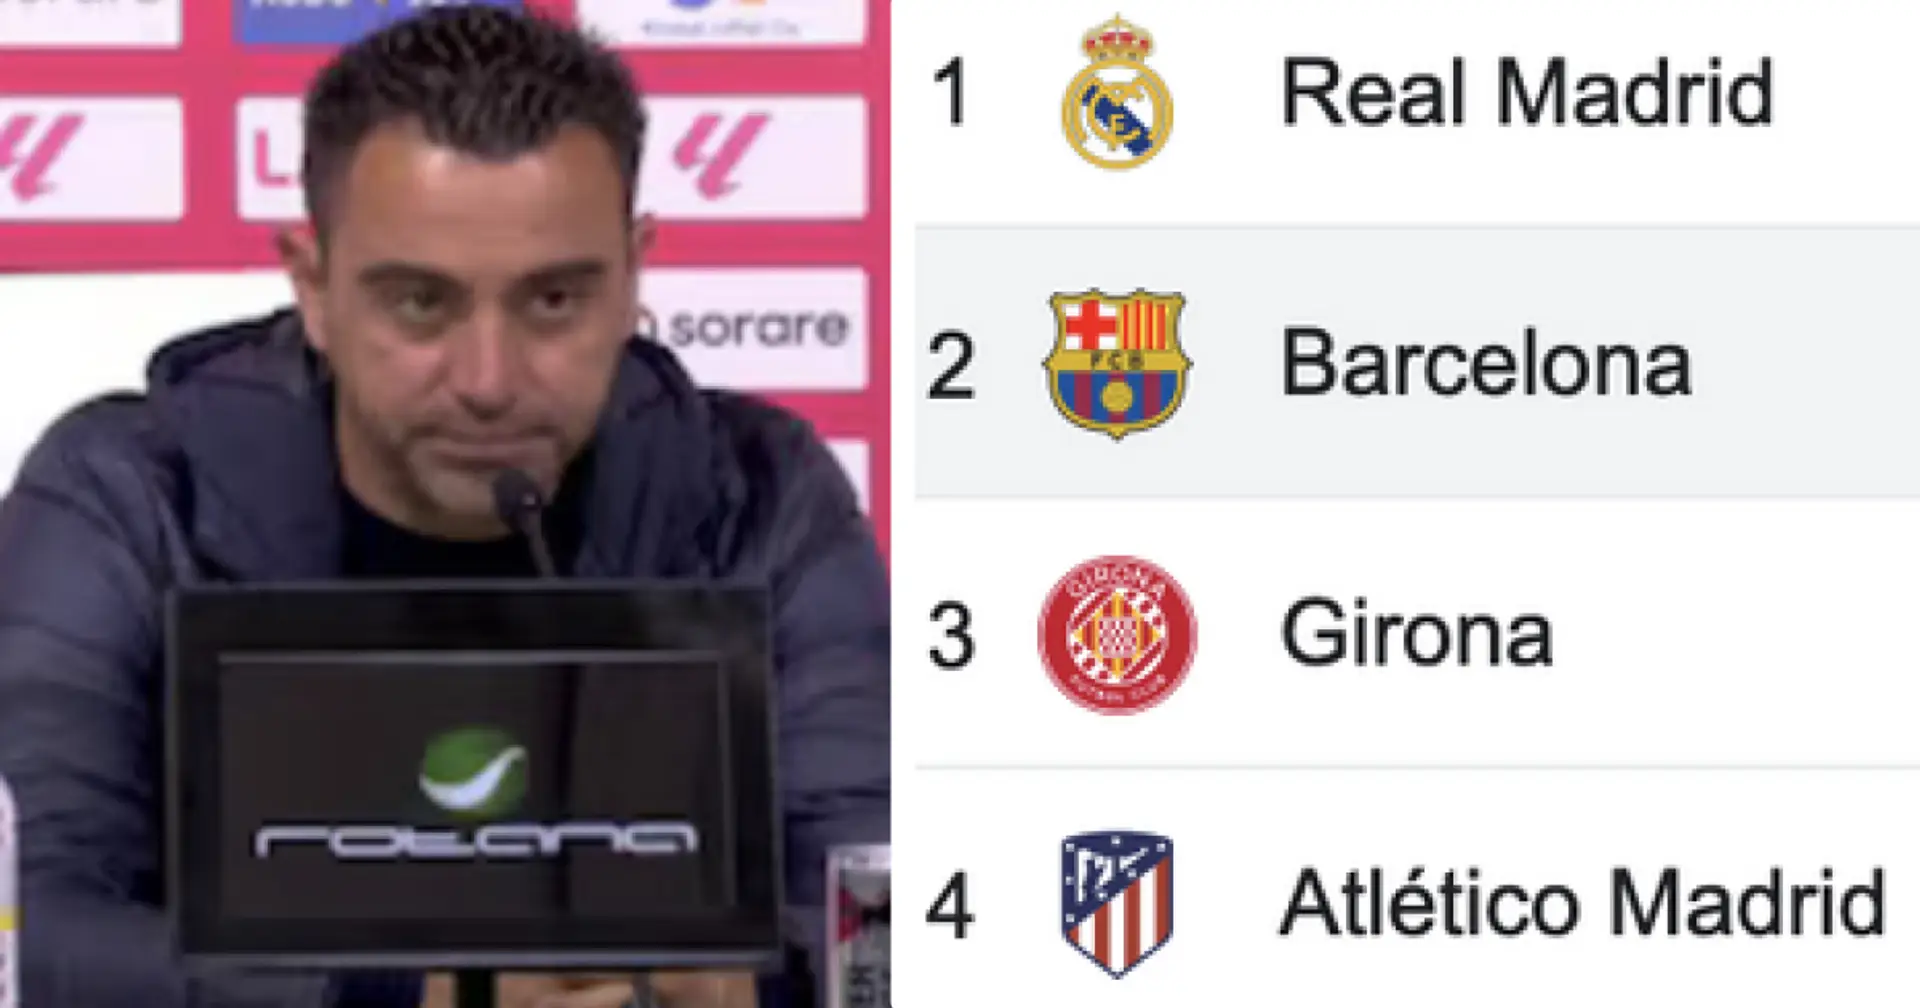 Could Girona still beat Barca to 2nd place in La Liga?